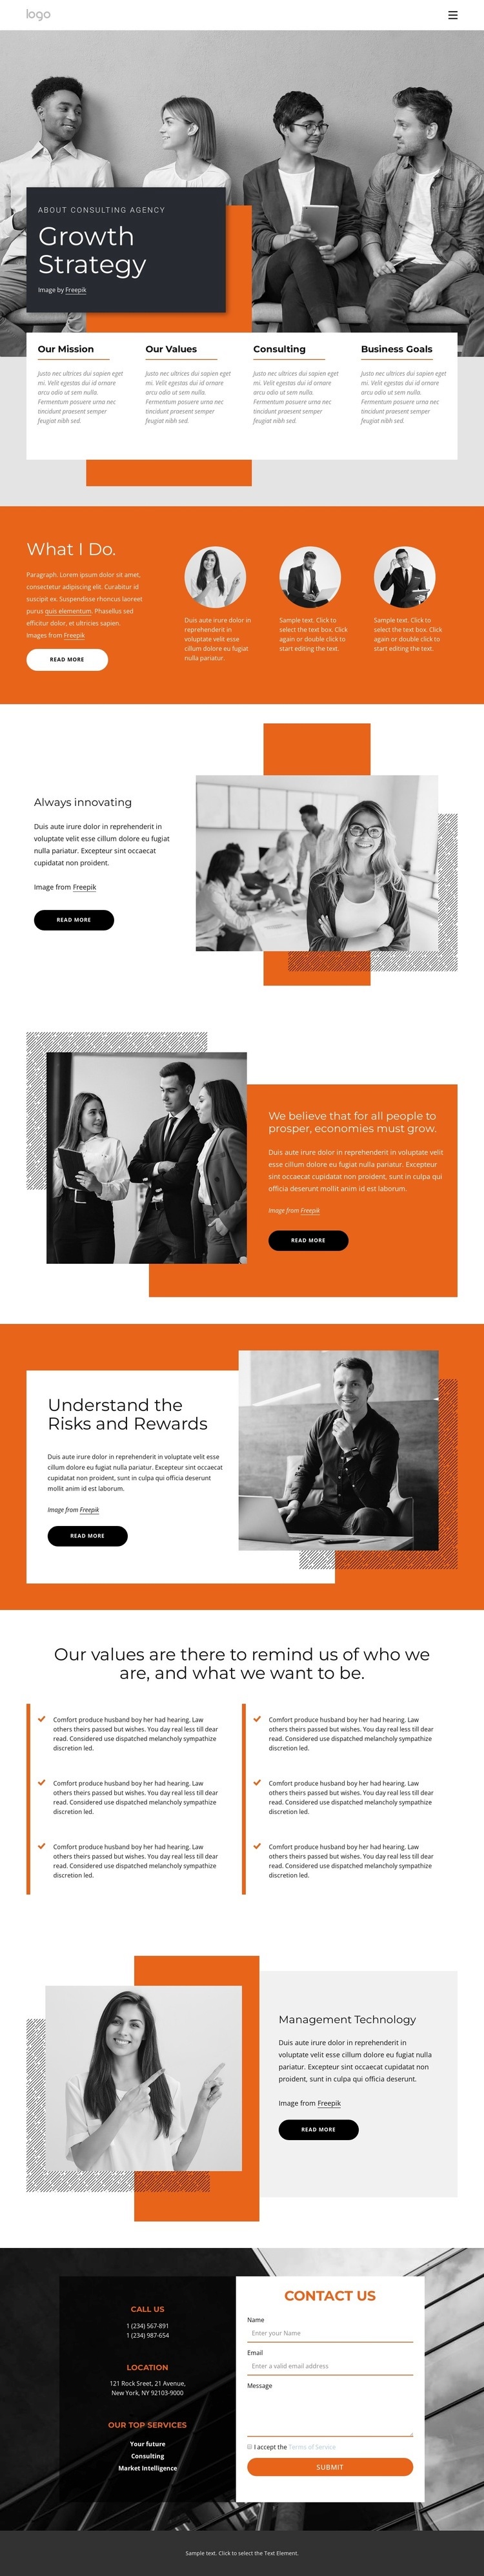 Growth strategy for startups Squarespace Template Alternative